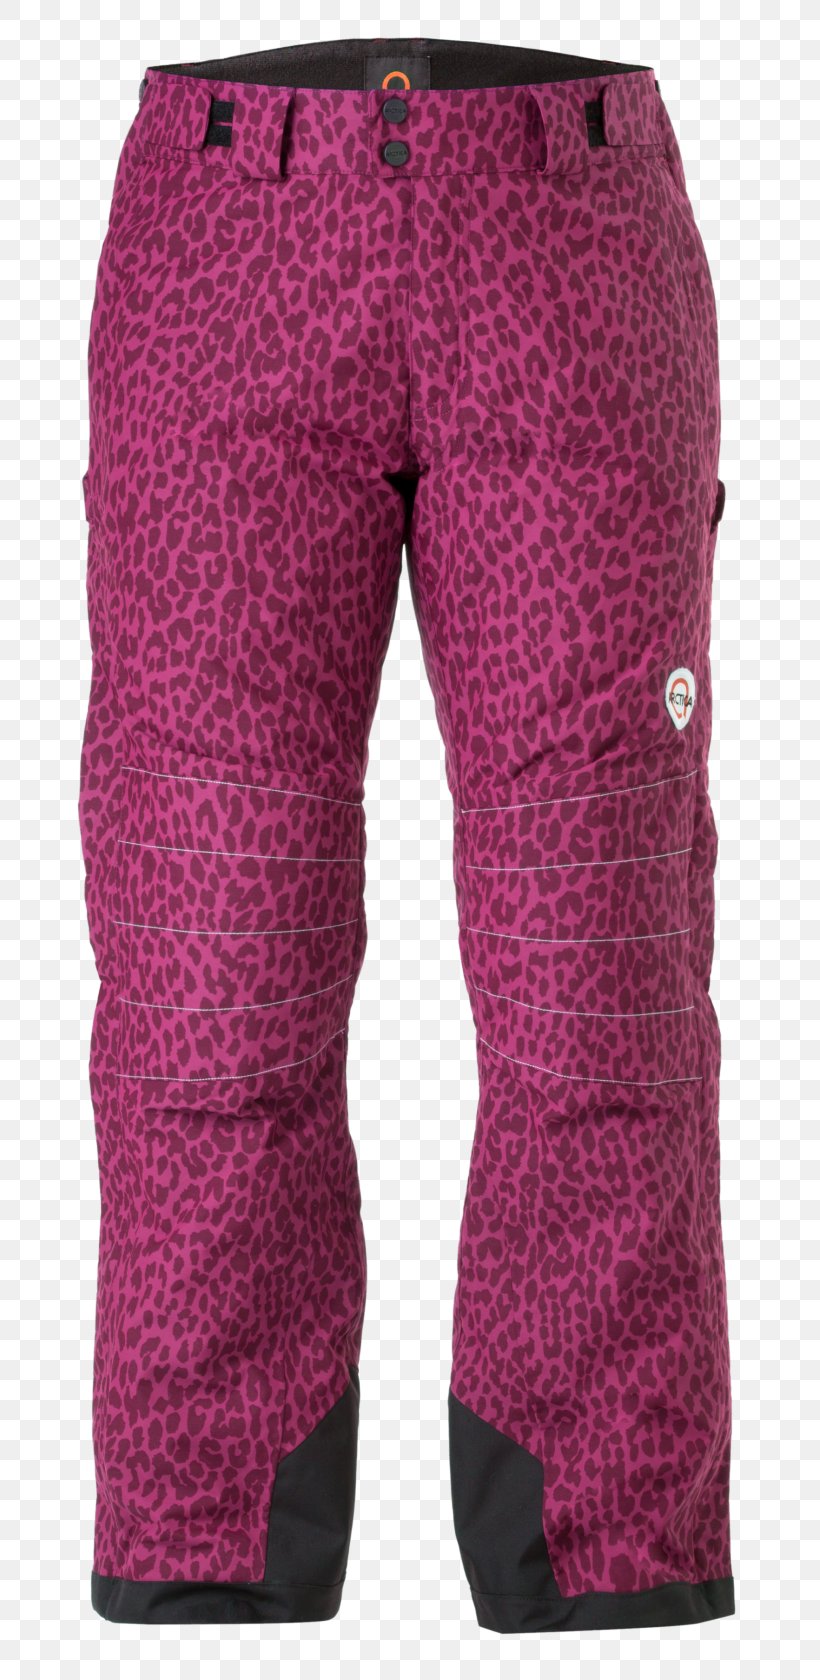 Cheetah Pants Animal Jeans Suit, PNG, 781x1680px, Cheetah, Animal, Color, Jeans, Magenta Download Free